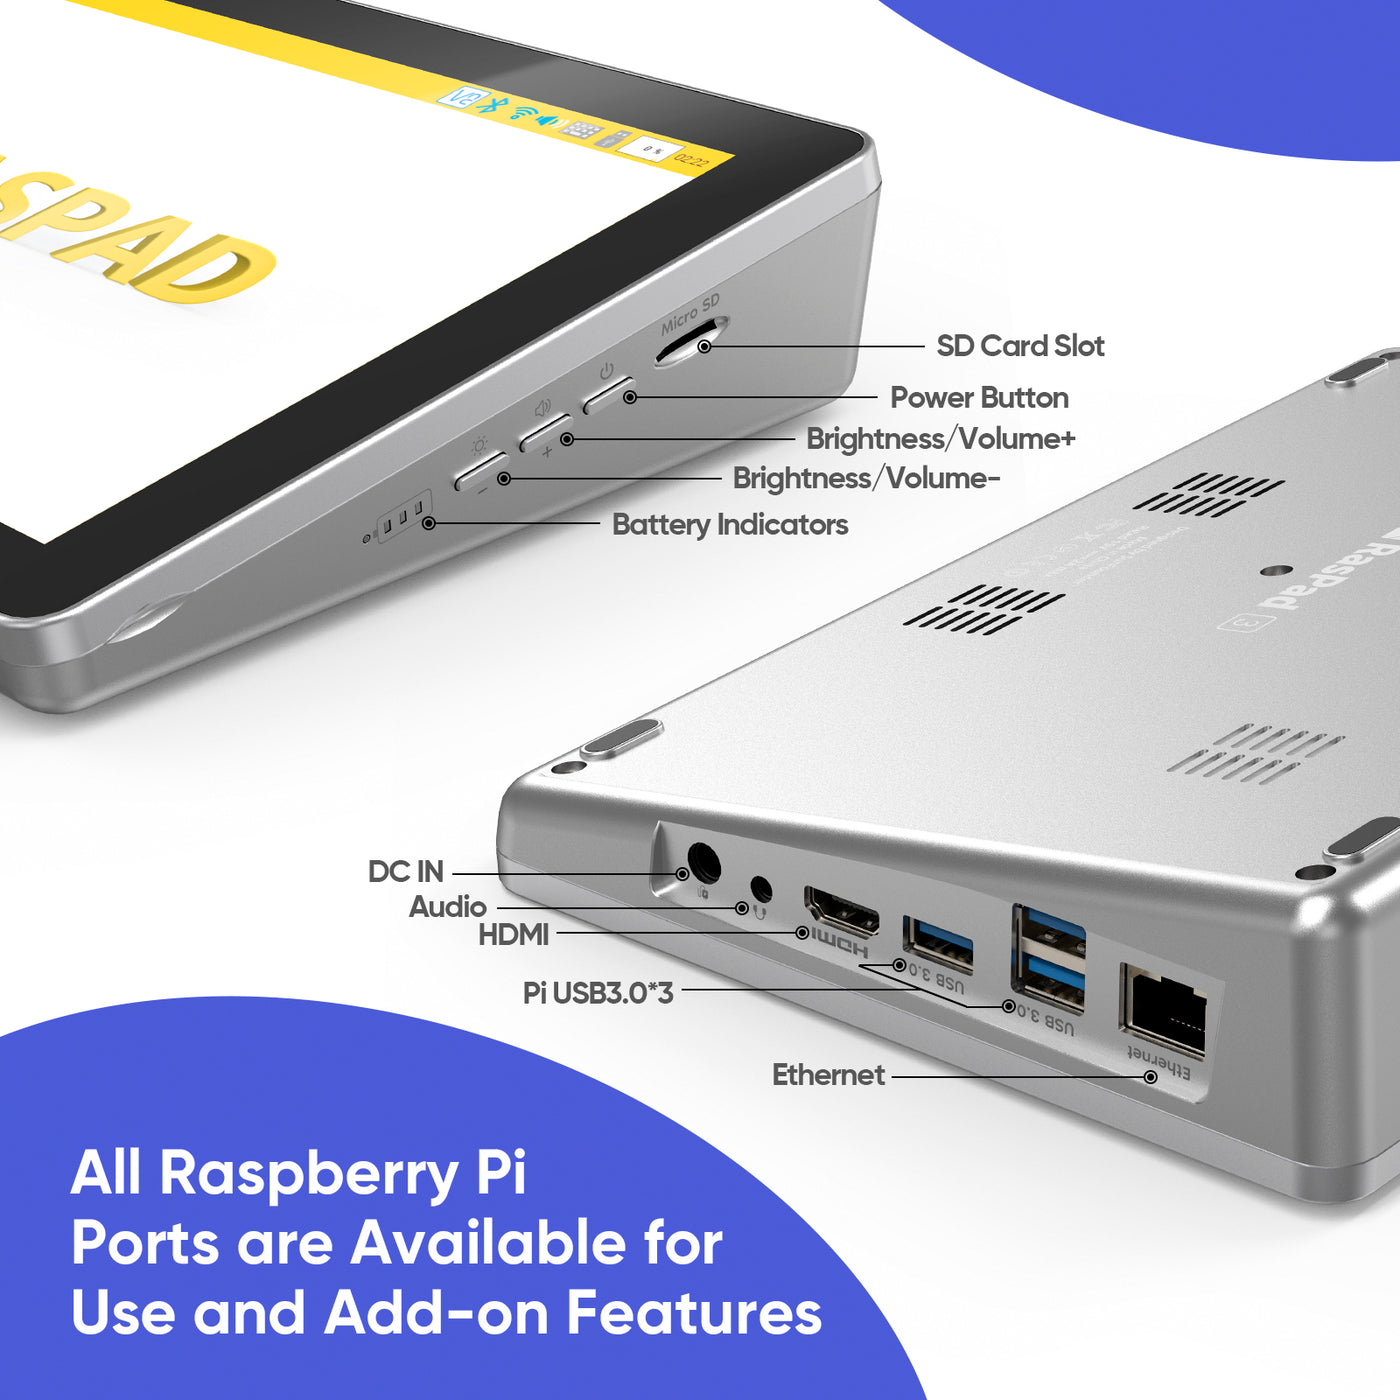 All Raspberry Pi Ports are available for use and Add-on Features